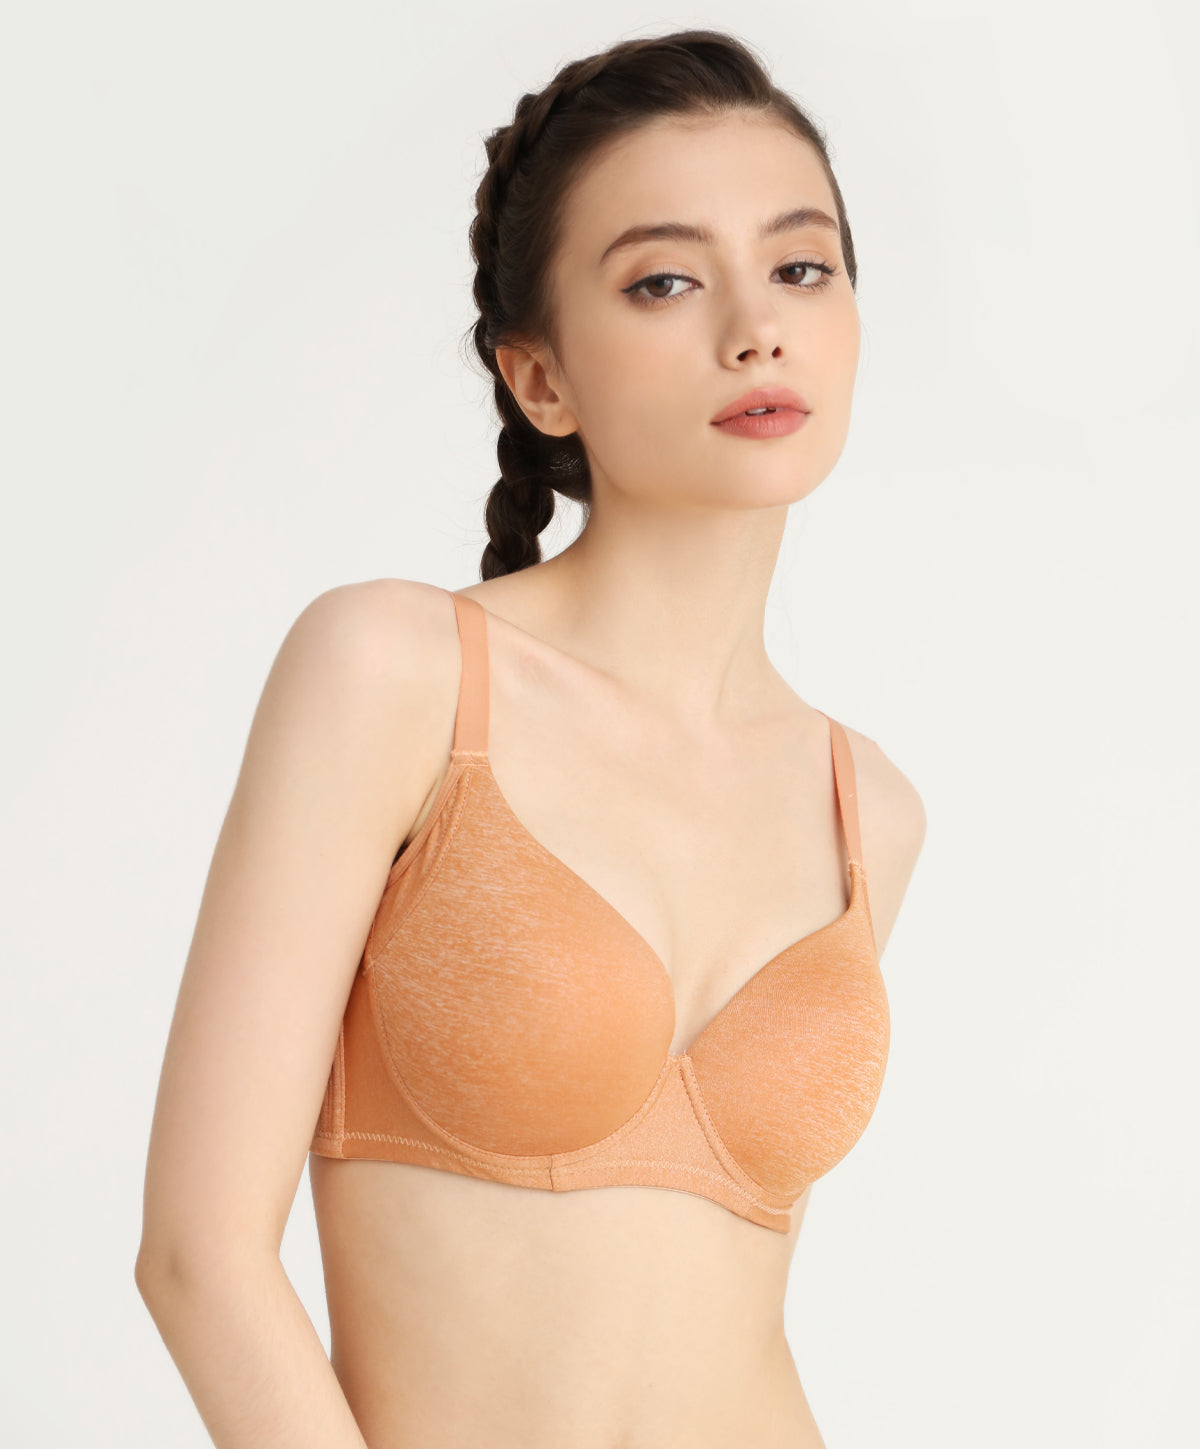 Pierre Cardin Underwire Extra Support Double Push-Up Bra 6304